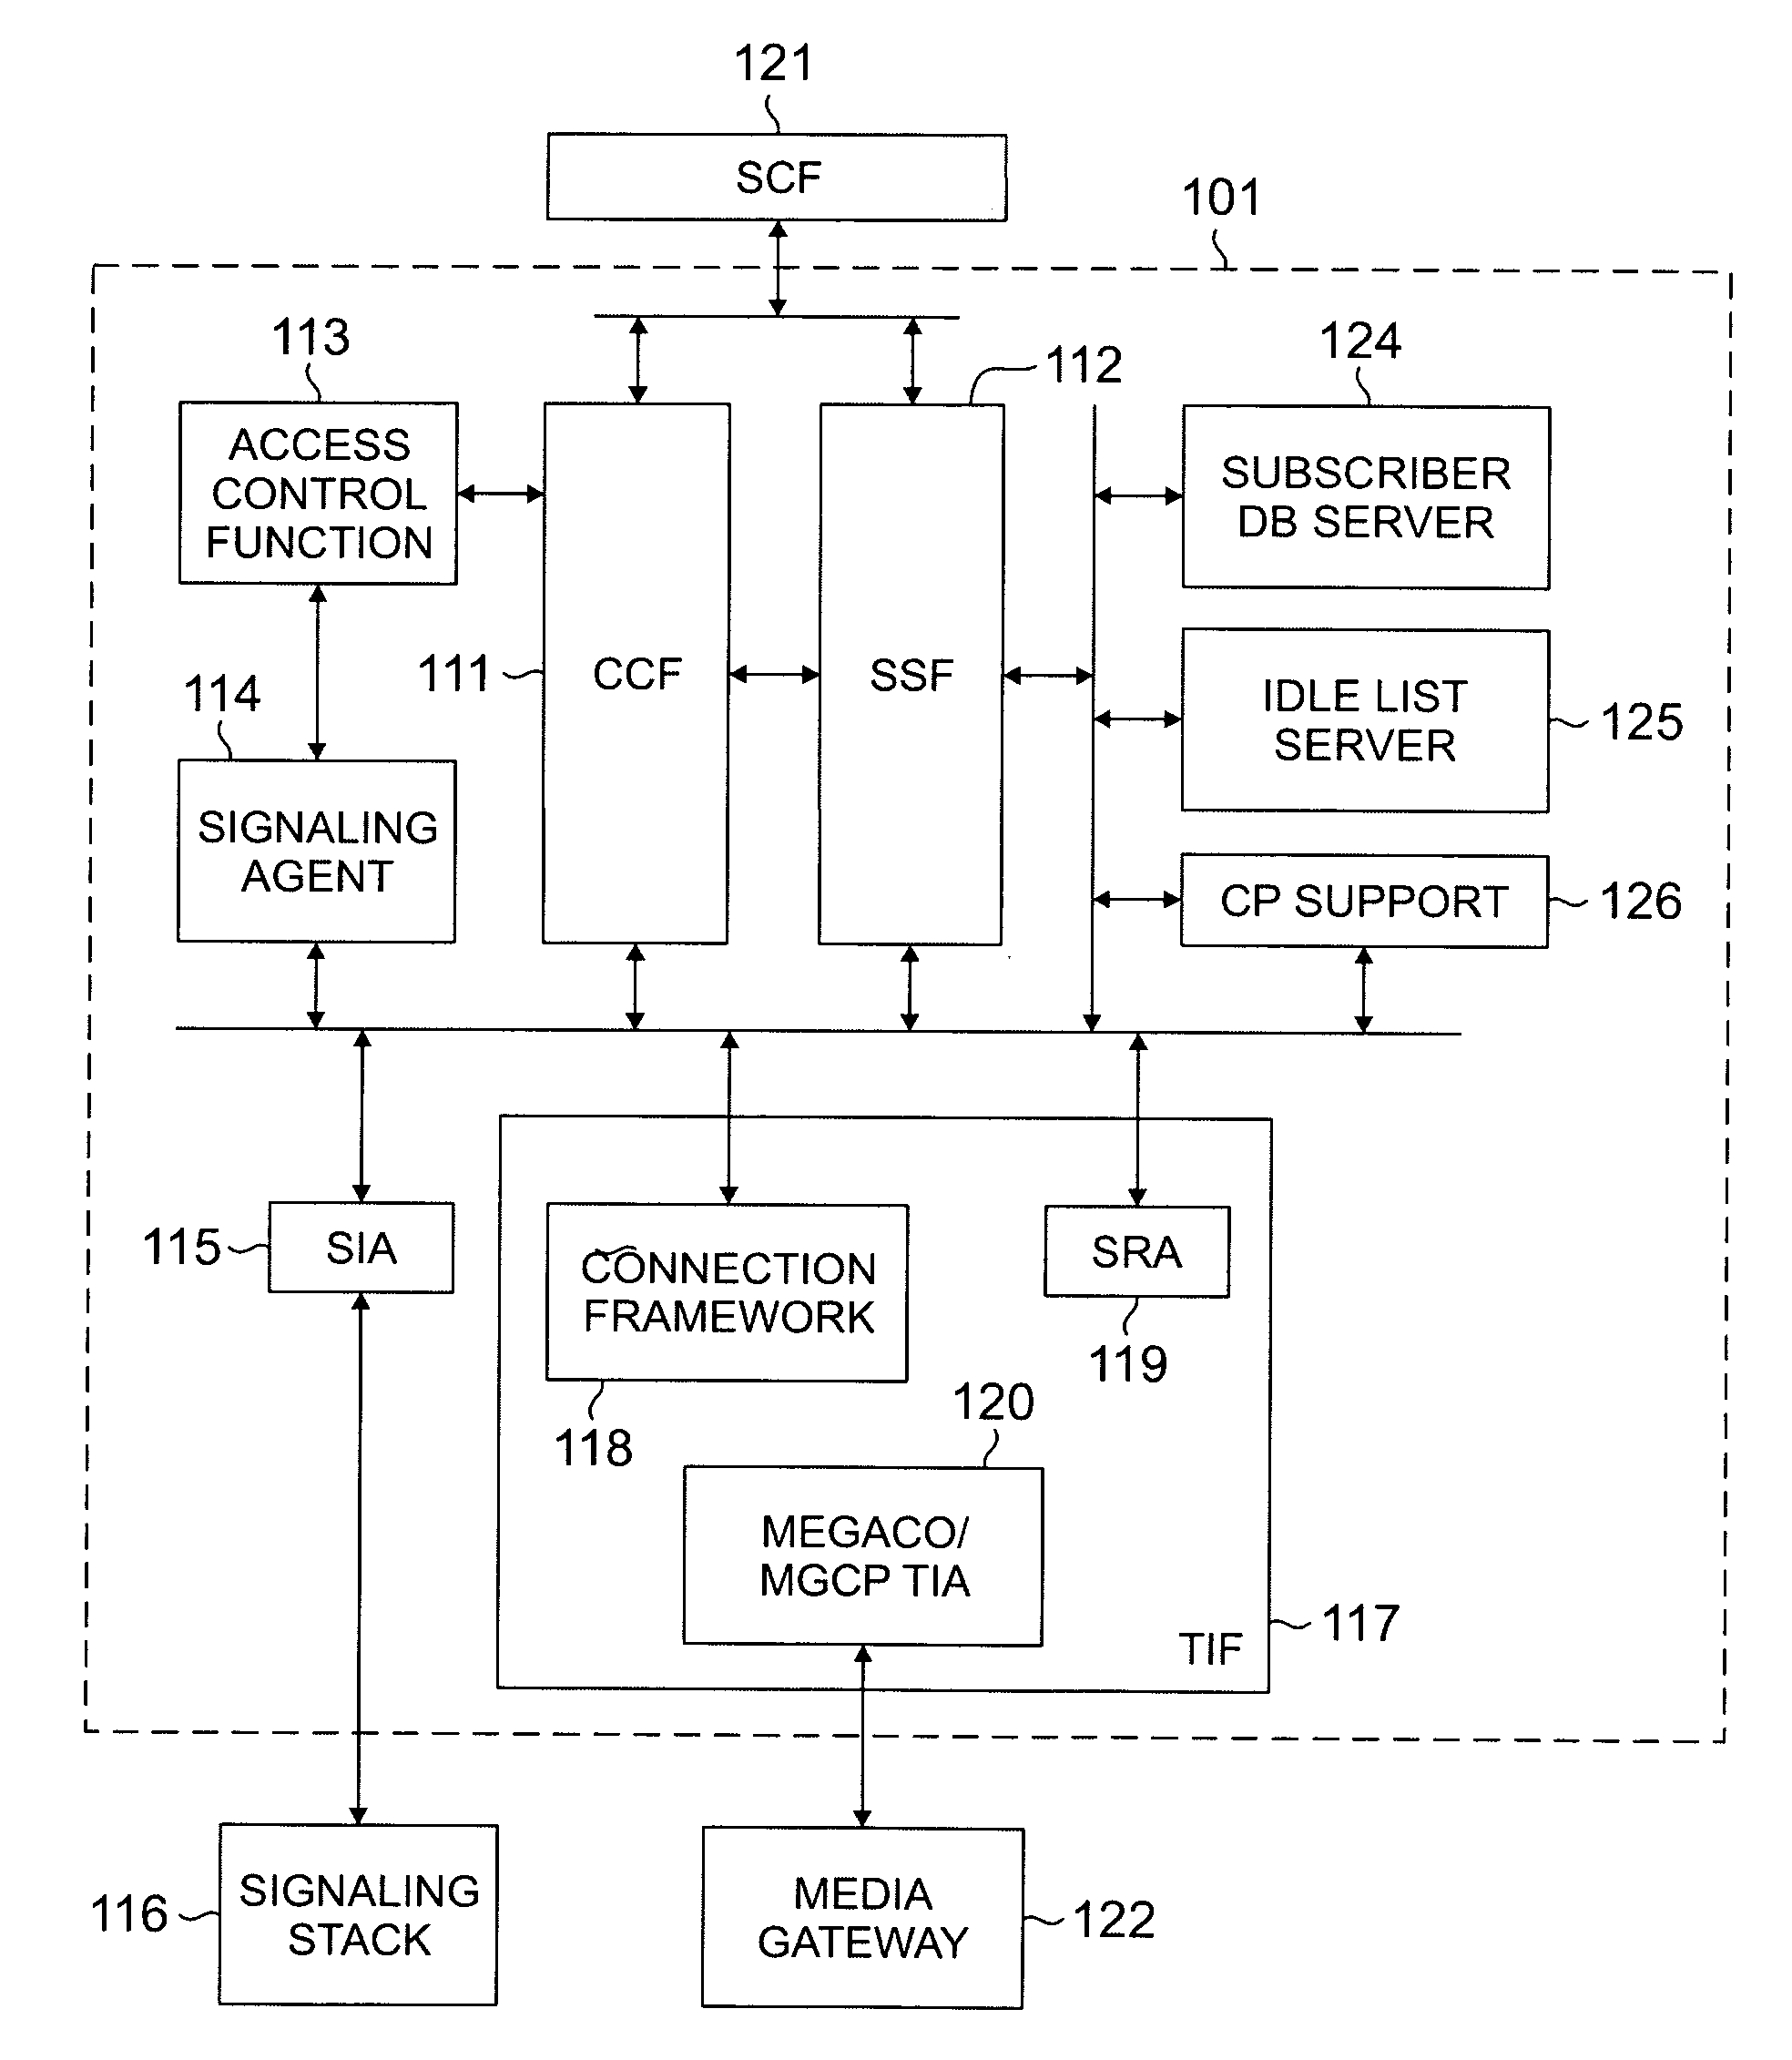 Advanced intelligent network access manager with state machine for processing multiple TCAP component messages